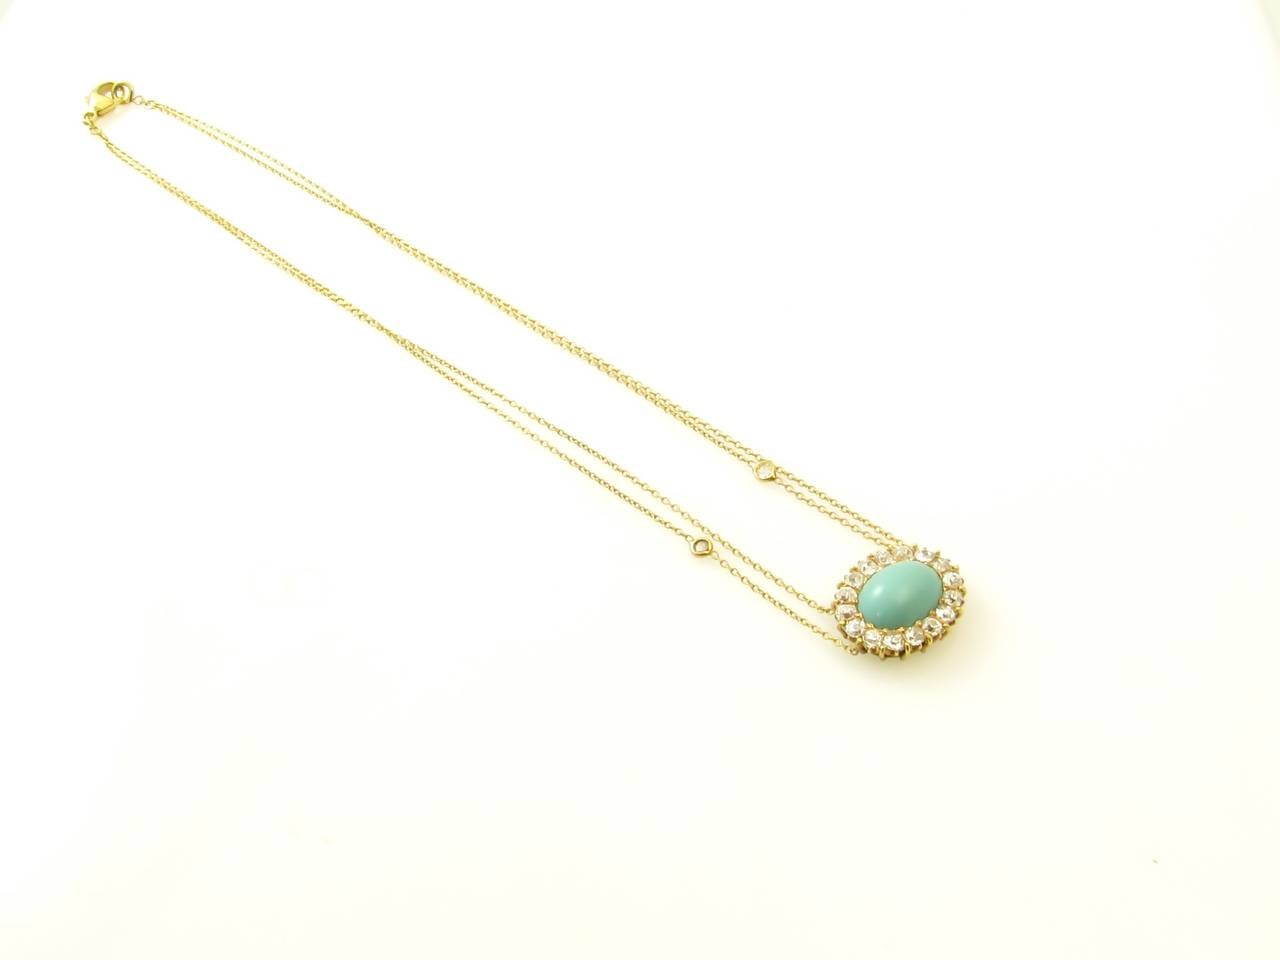 An 18 karat yellow gold, diamond and turquoise necklace with lobster claw clasp, Signed Renee Lewis 18Kt.  The necklace is set with an oval turquoise in a 16 old European cut diamond cluster setting, suspended from a double chain with a collet set